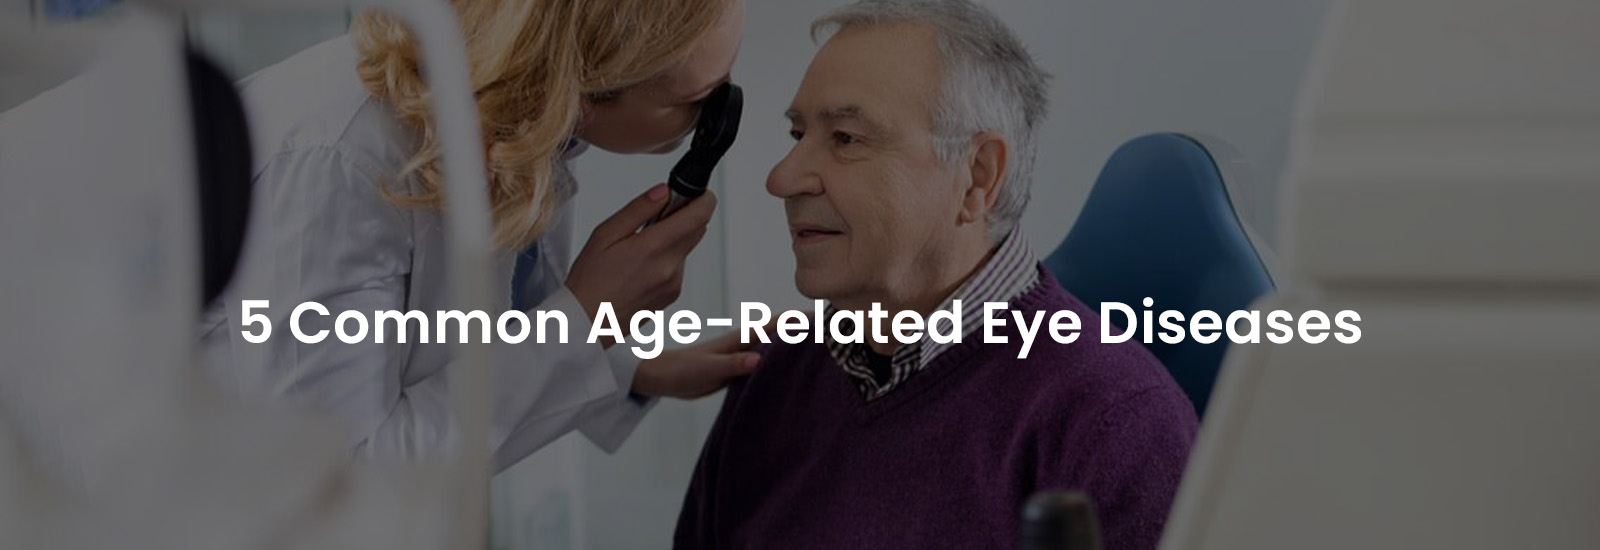 5 Common Age-Related Eye Diseases | Banner Image